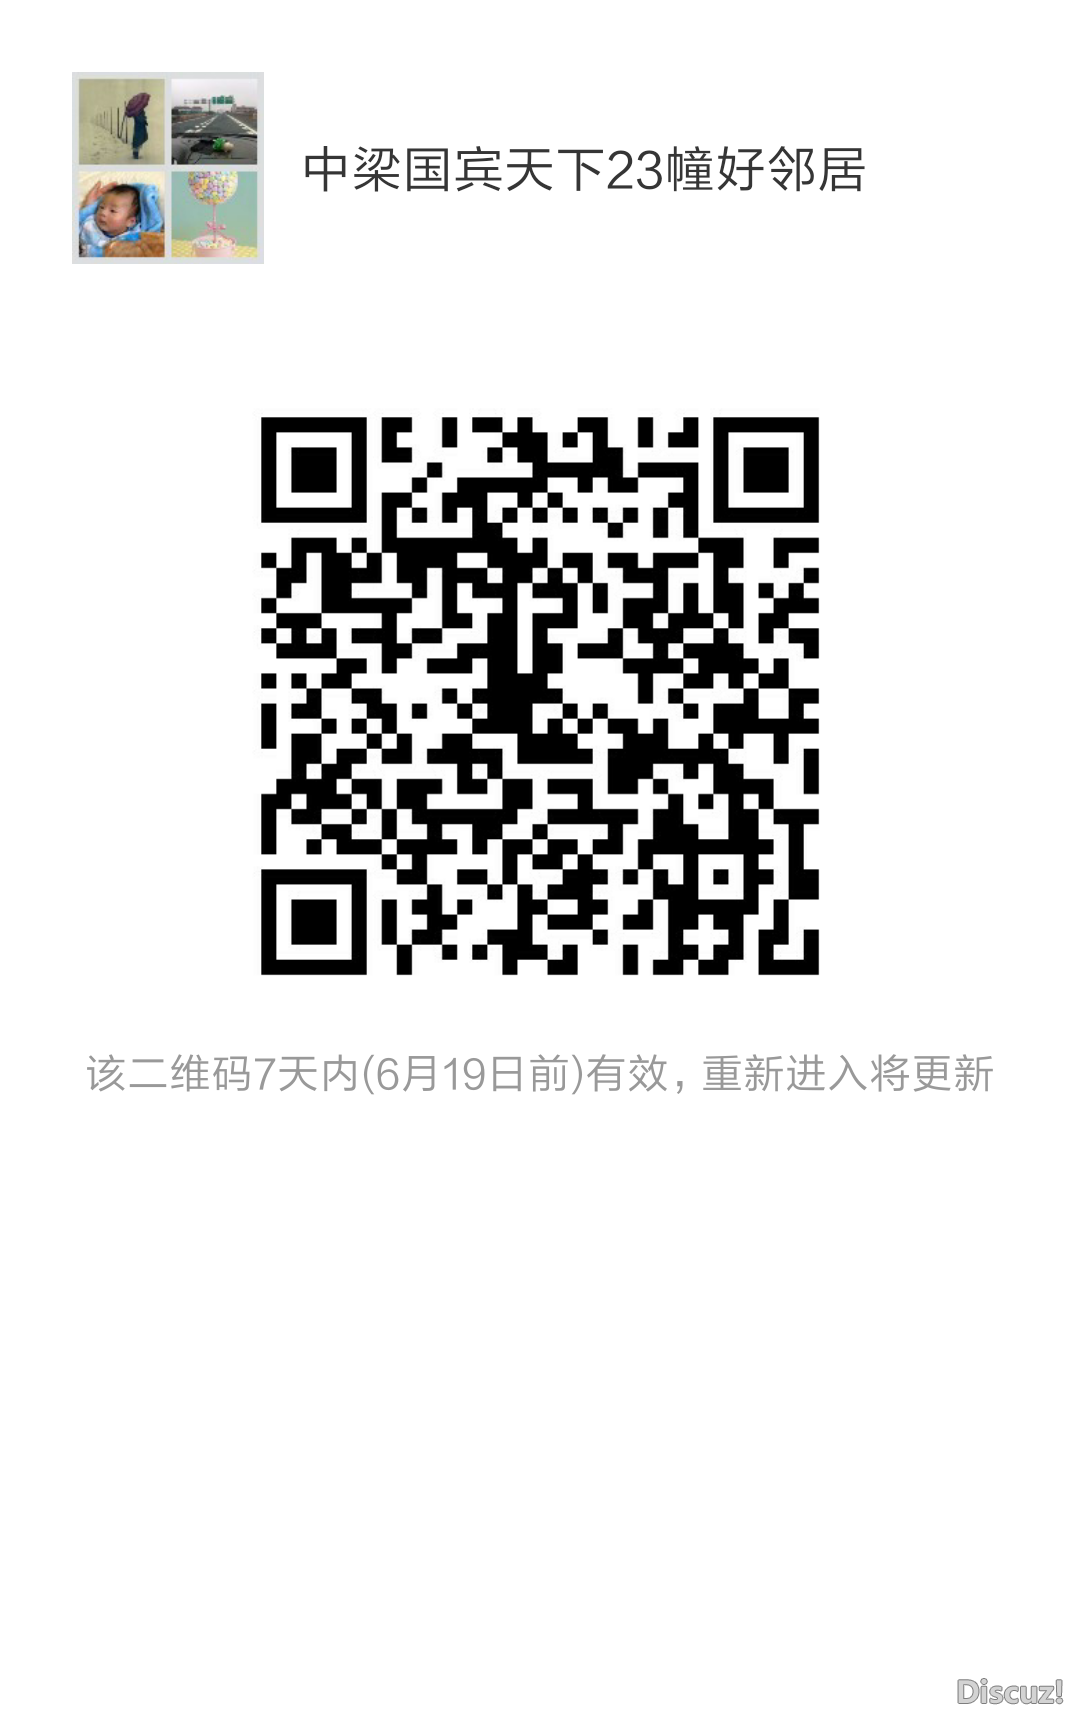 mmqrcode1465721358596.png